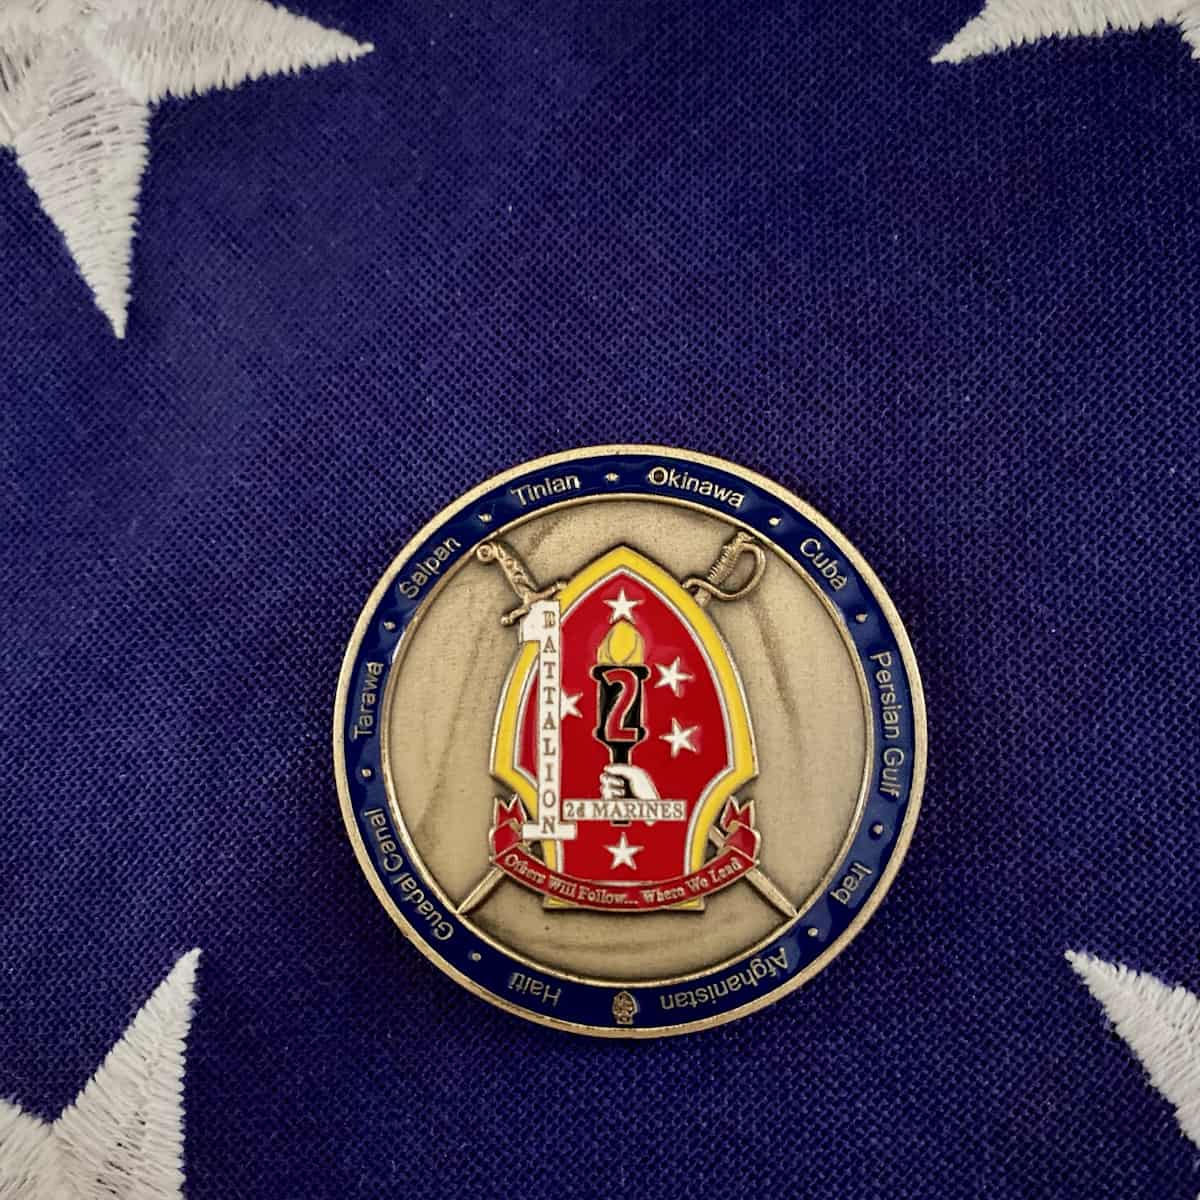 Military challenge coin.